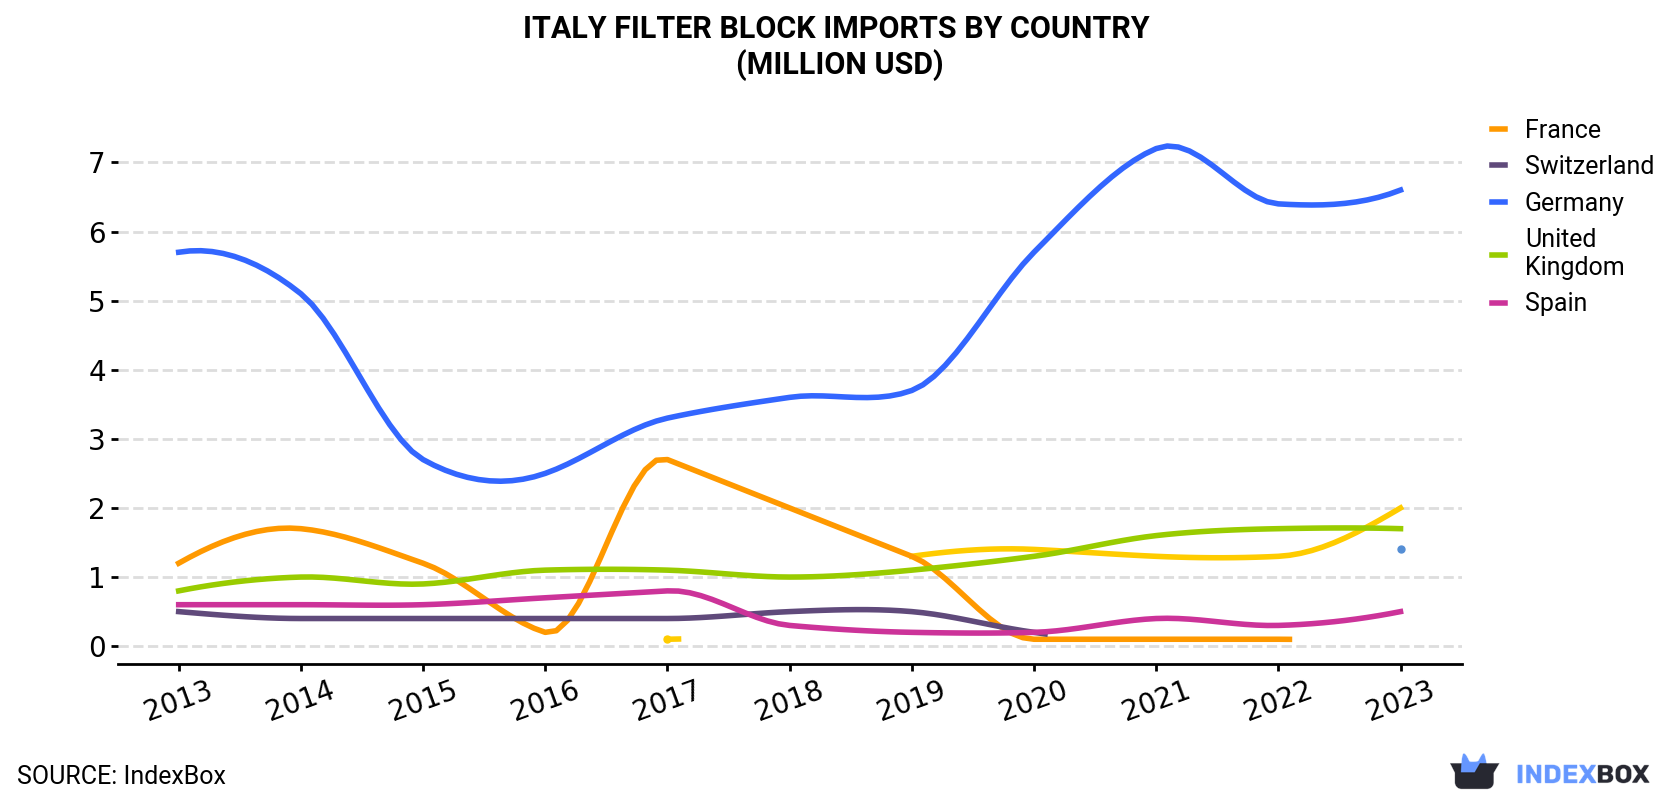 Italy Filter Block Imports By Country (Million USD)